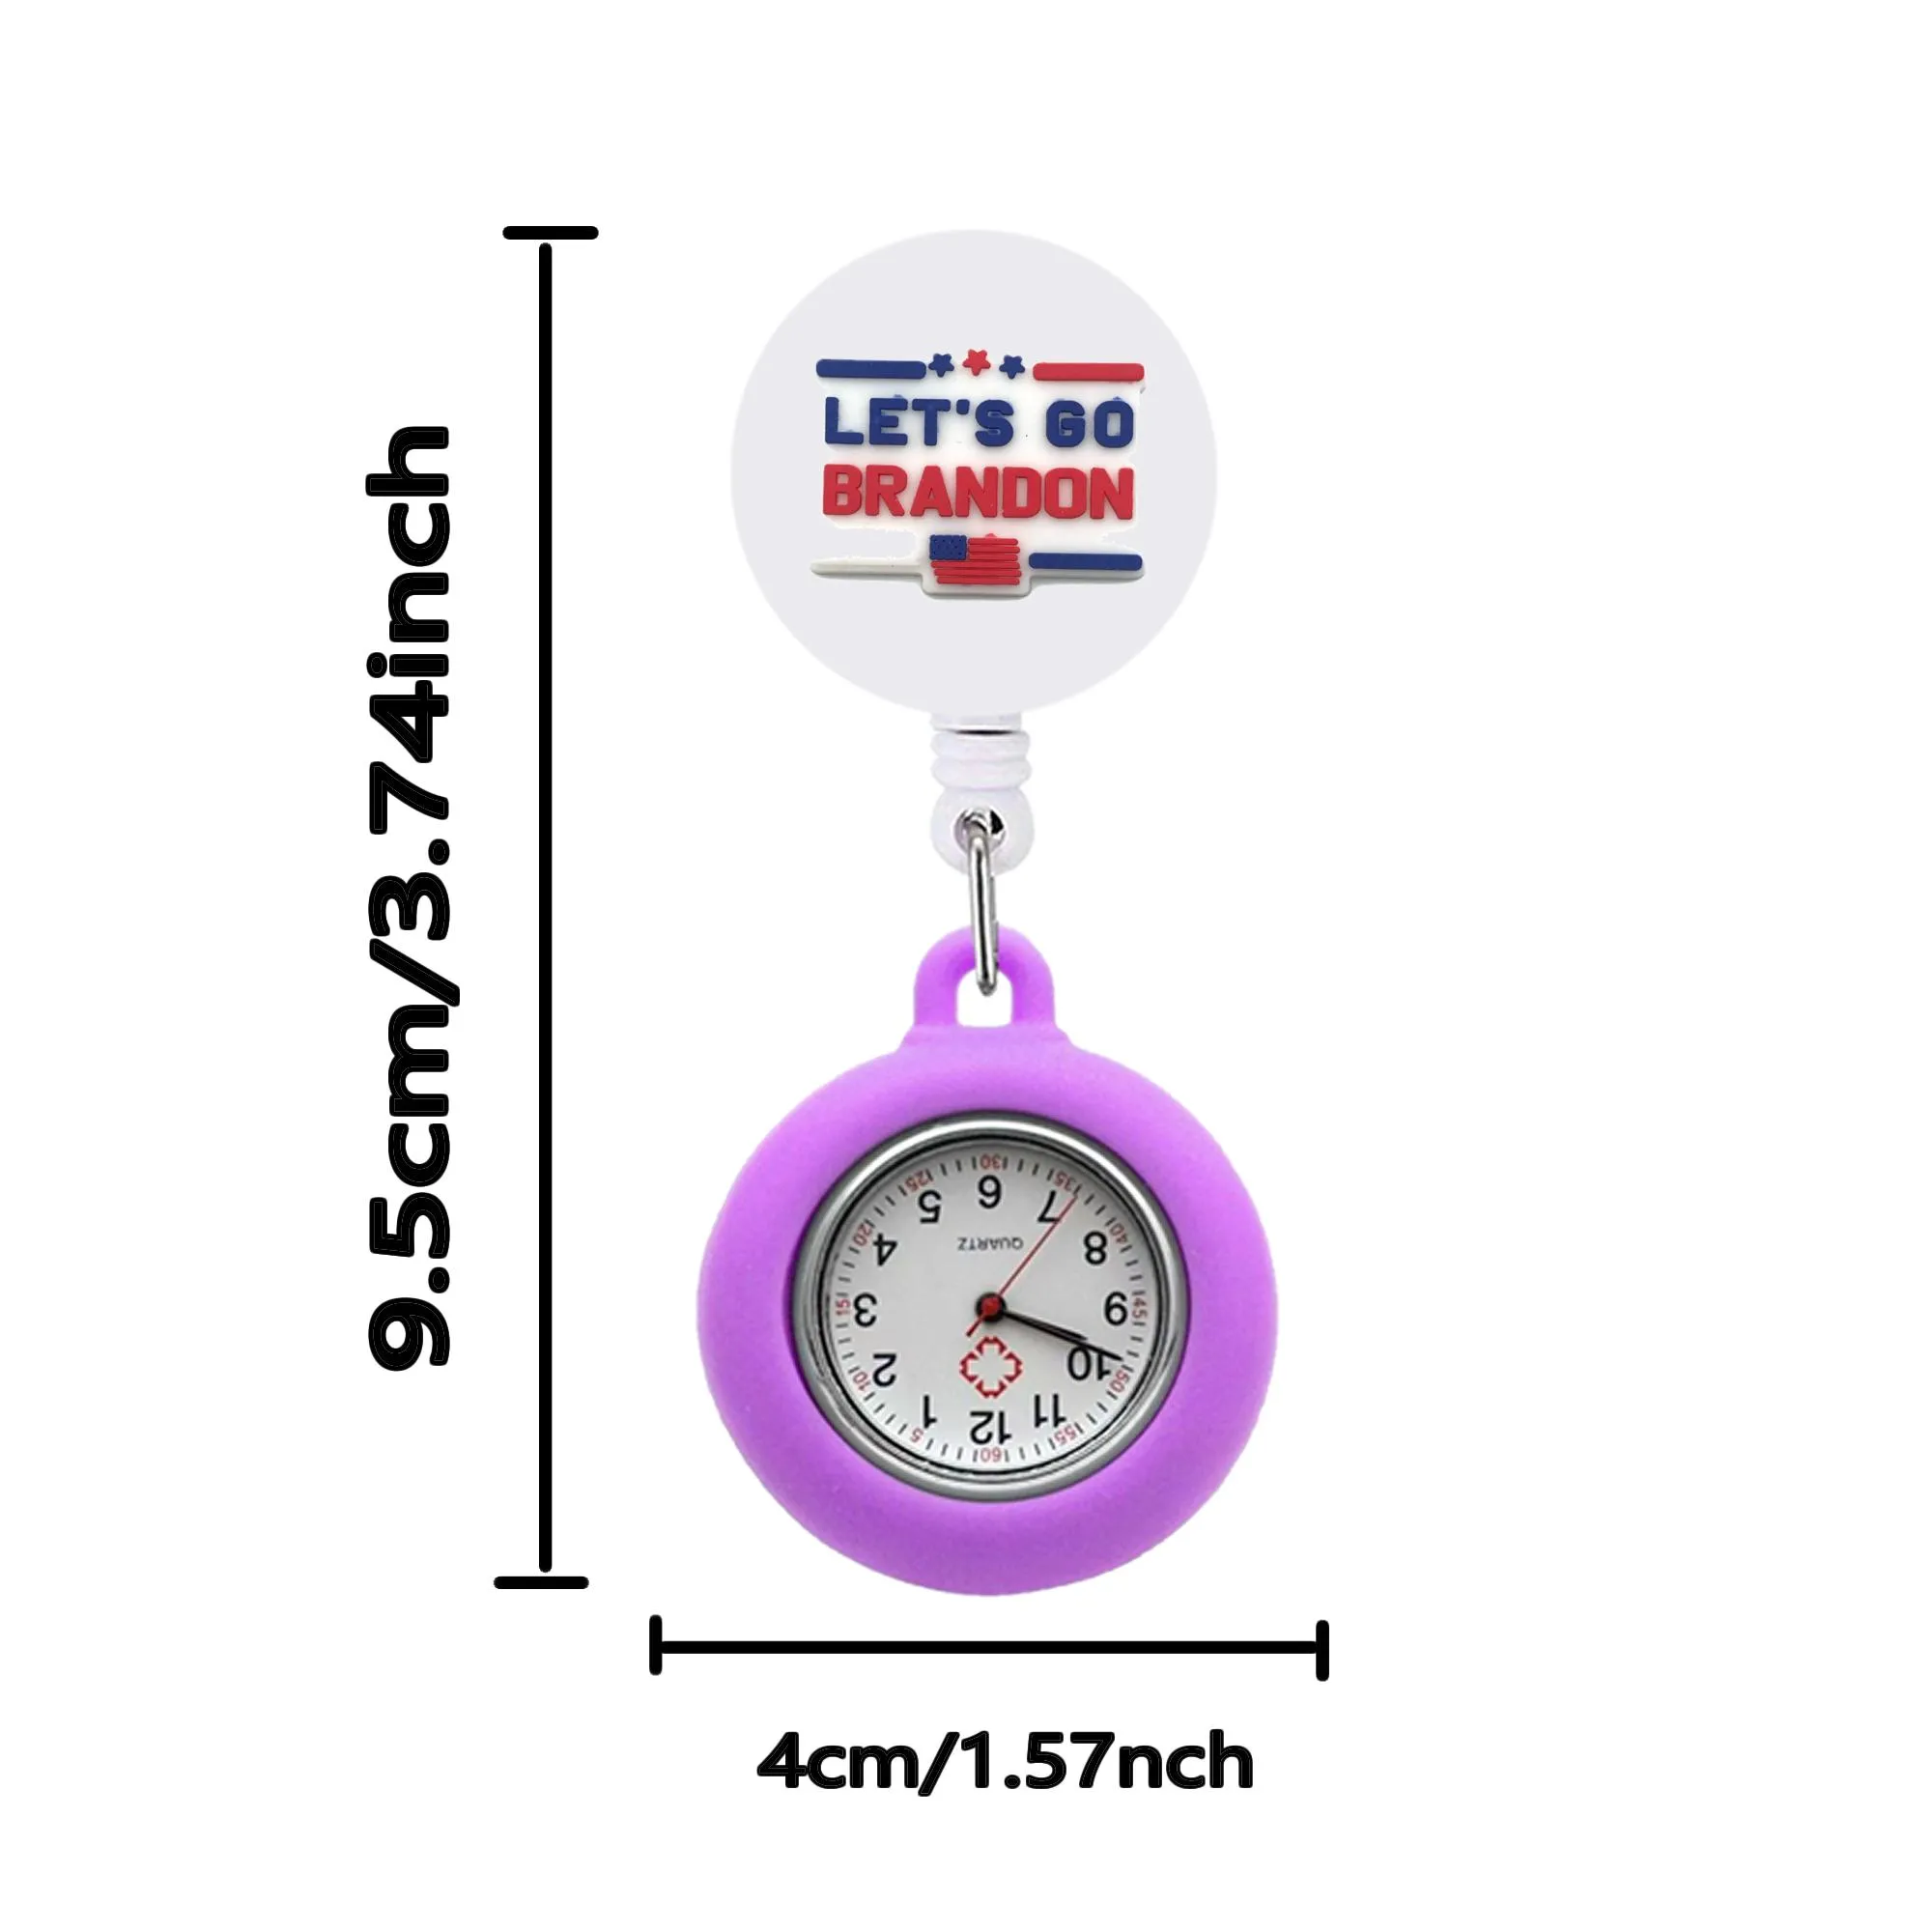 lets go brandon10 clip pocket watches retractable watch for student gifts with second hand nurse on brooch fob medical workers